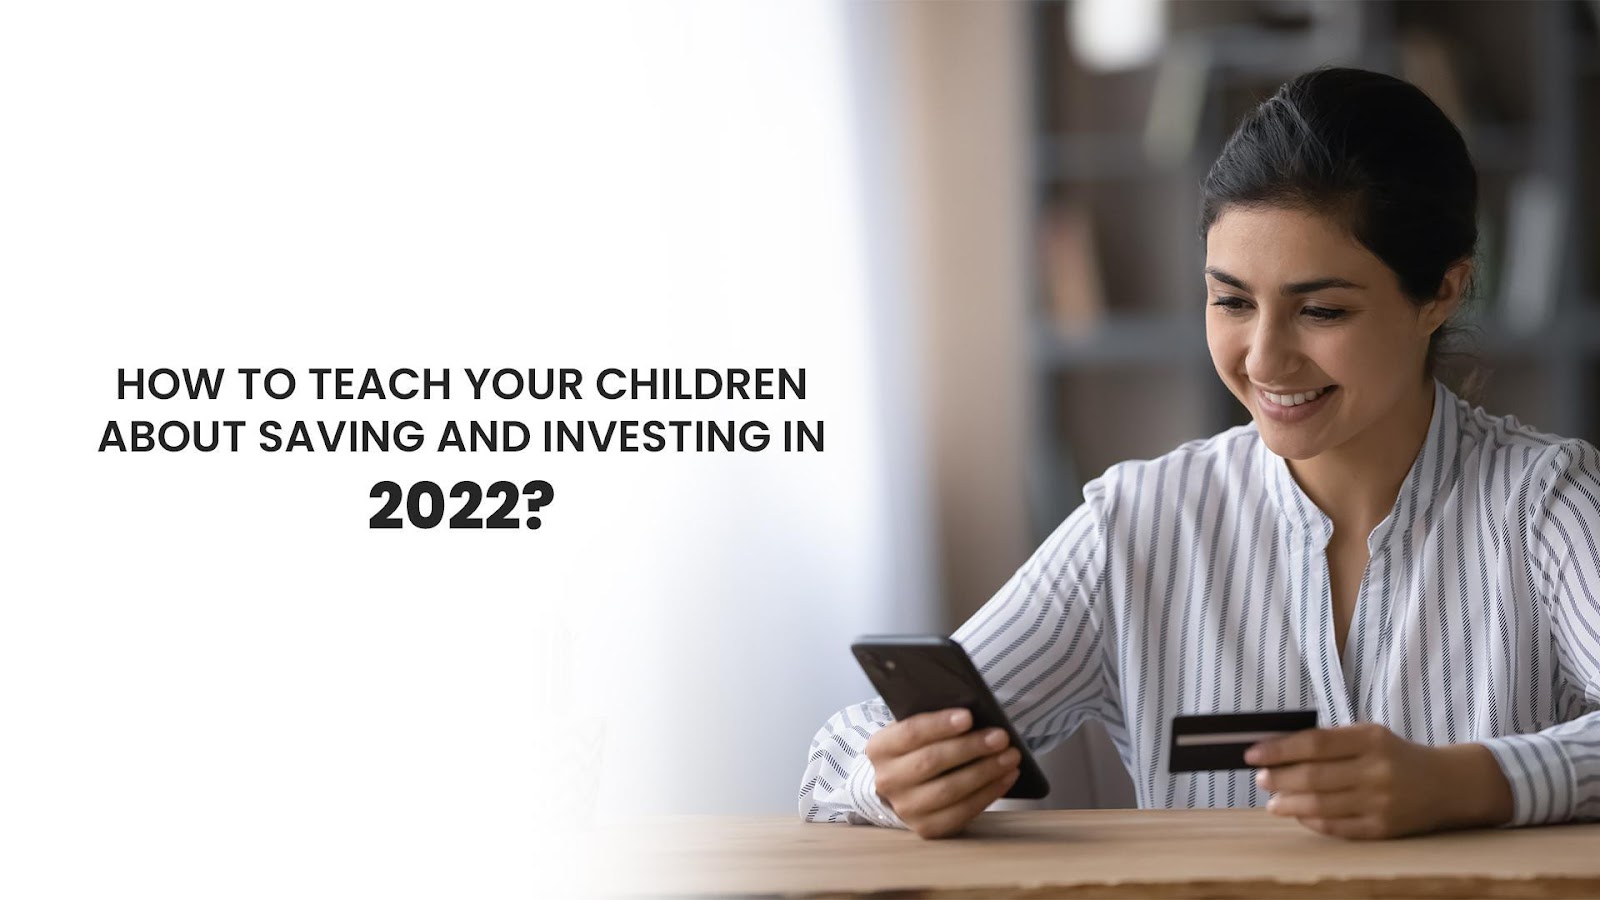 How To Teach Your Children About Saving And Investing In 2022?